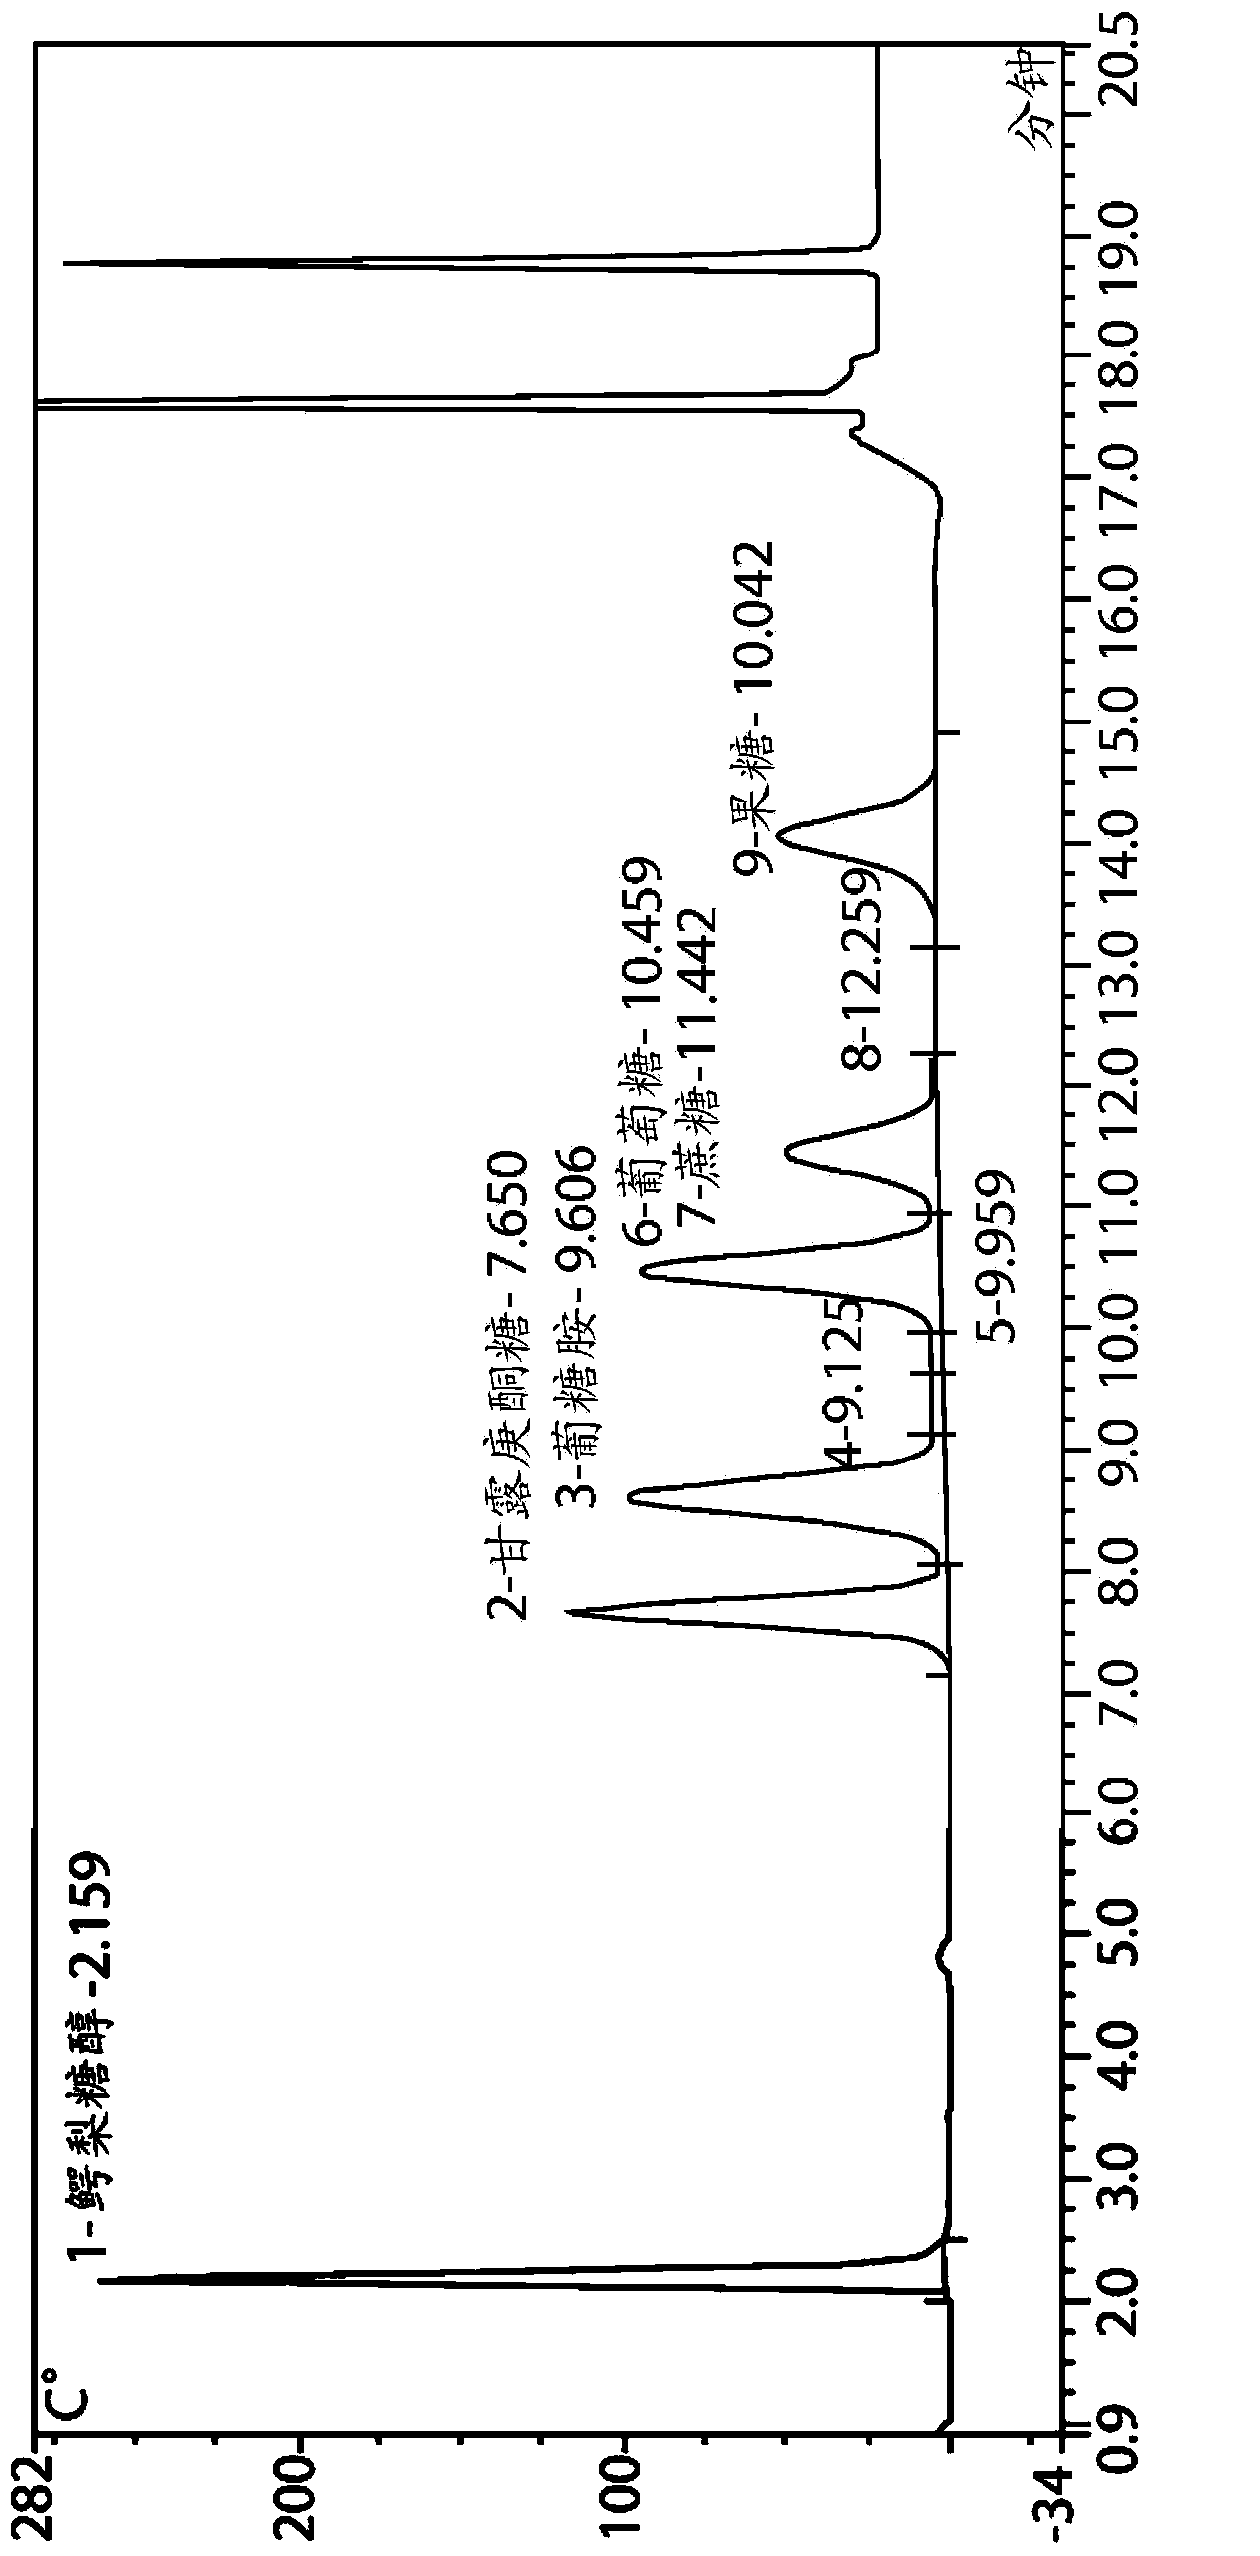 Compositions comprising a glucose anti-metabolite, BHA, and/or BHT